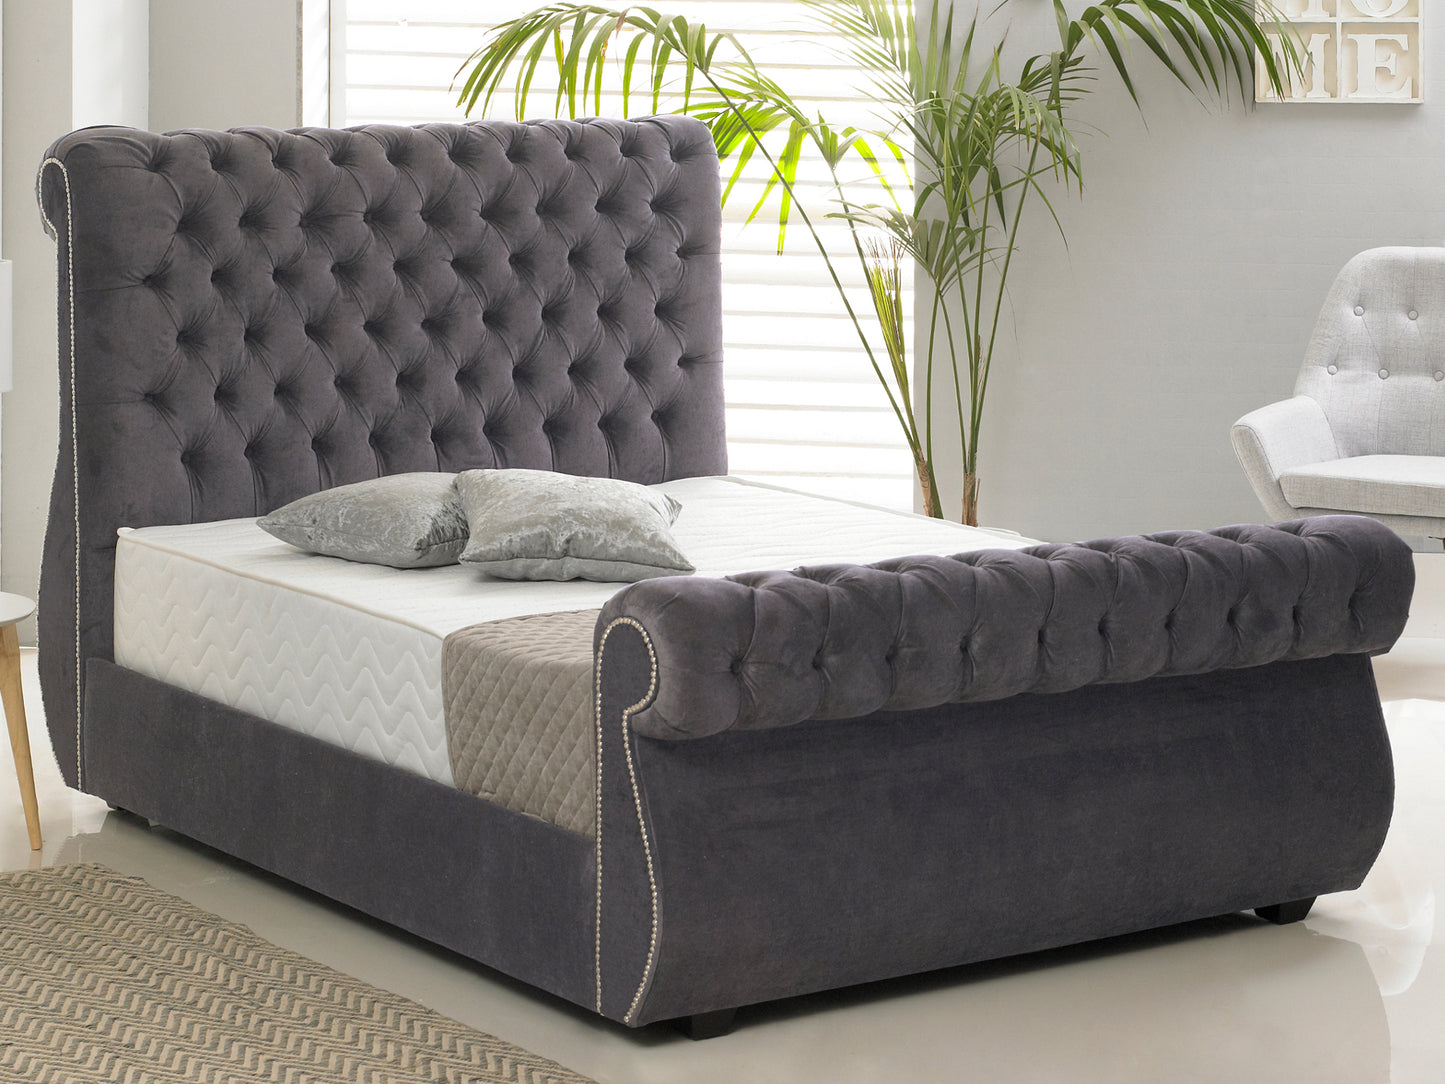 Chiswick Luxury Bed Frame in Hercules Charcoal